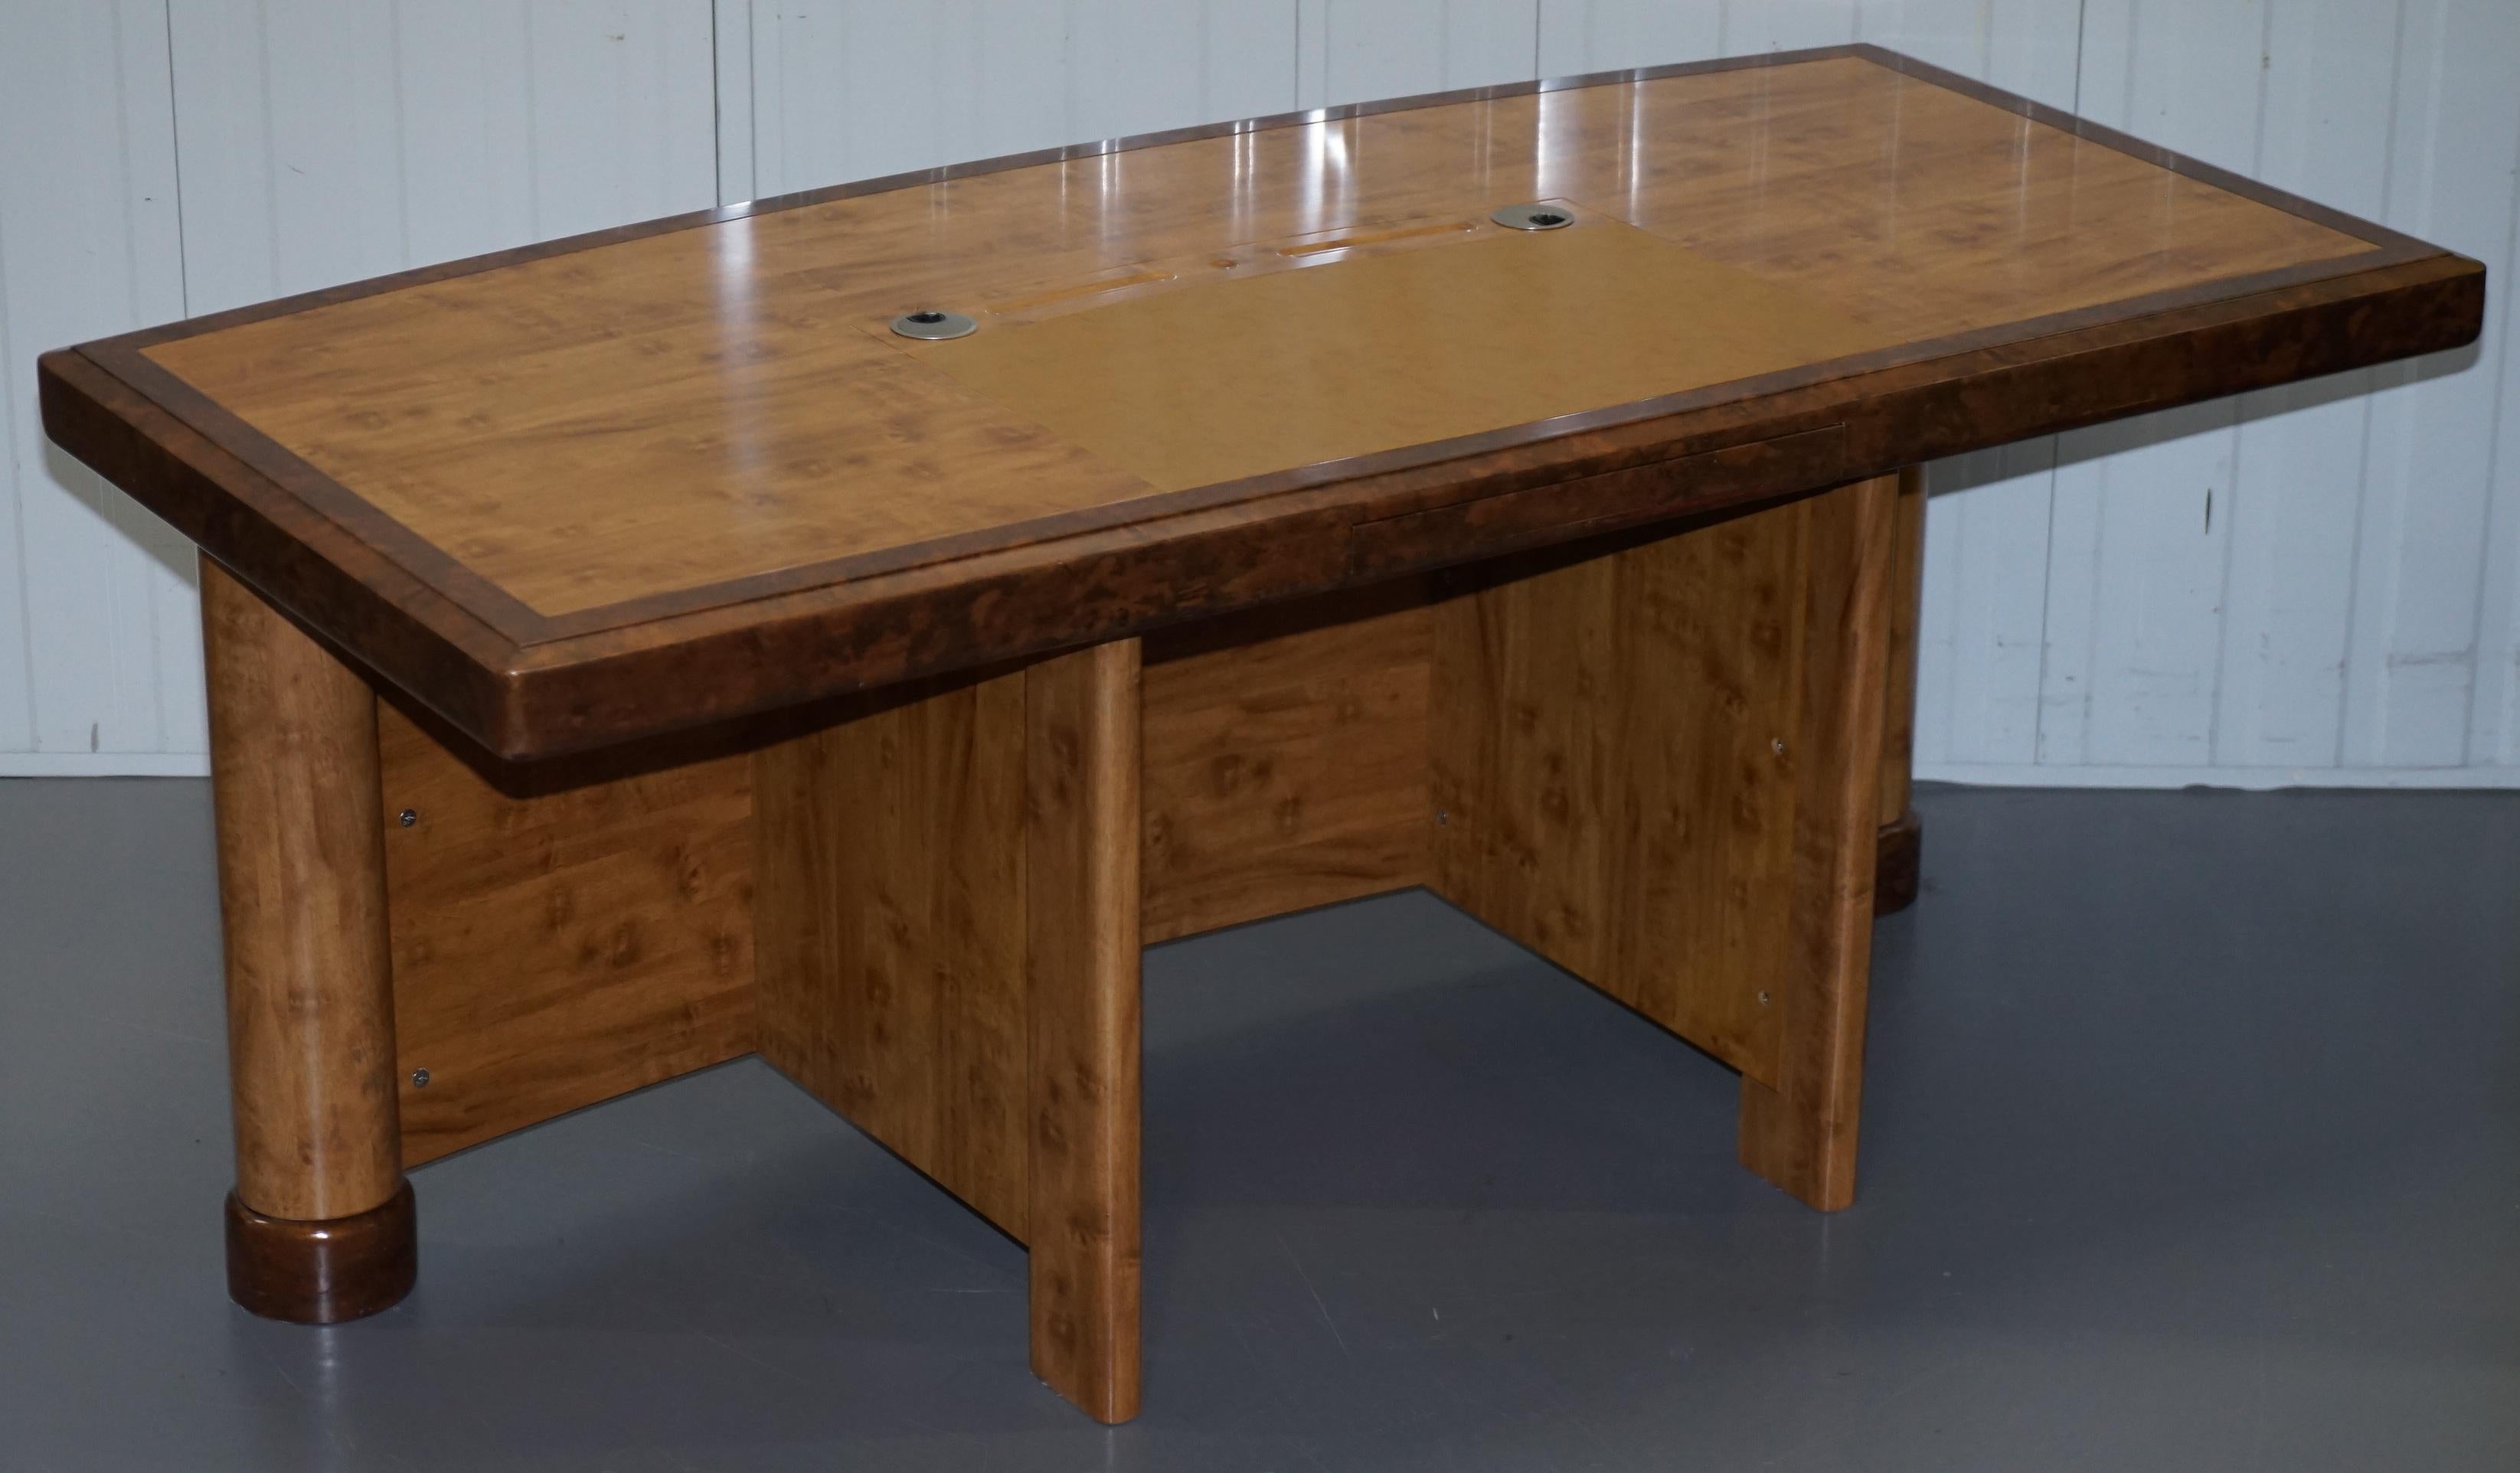 We are delighted to offer for sale this stunning burr walnut Directors desk

This lovely desk is of a suite, I have the matching side cabinet and small sideboard sized filing cabinet as well

This piece is in perfect condition, it designed to be